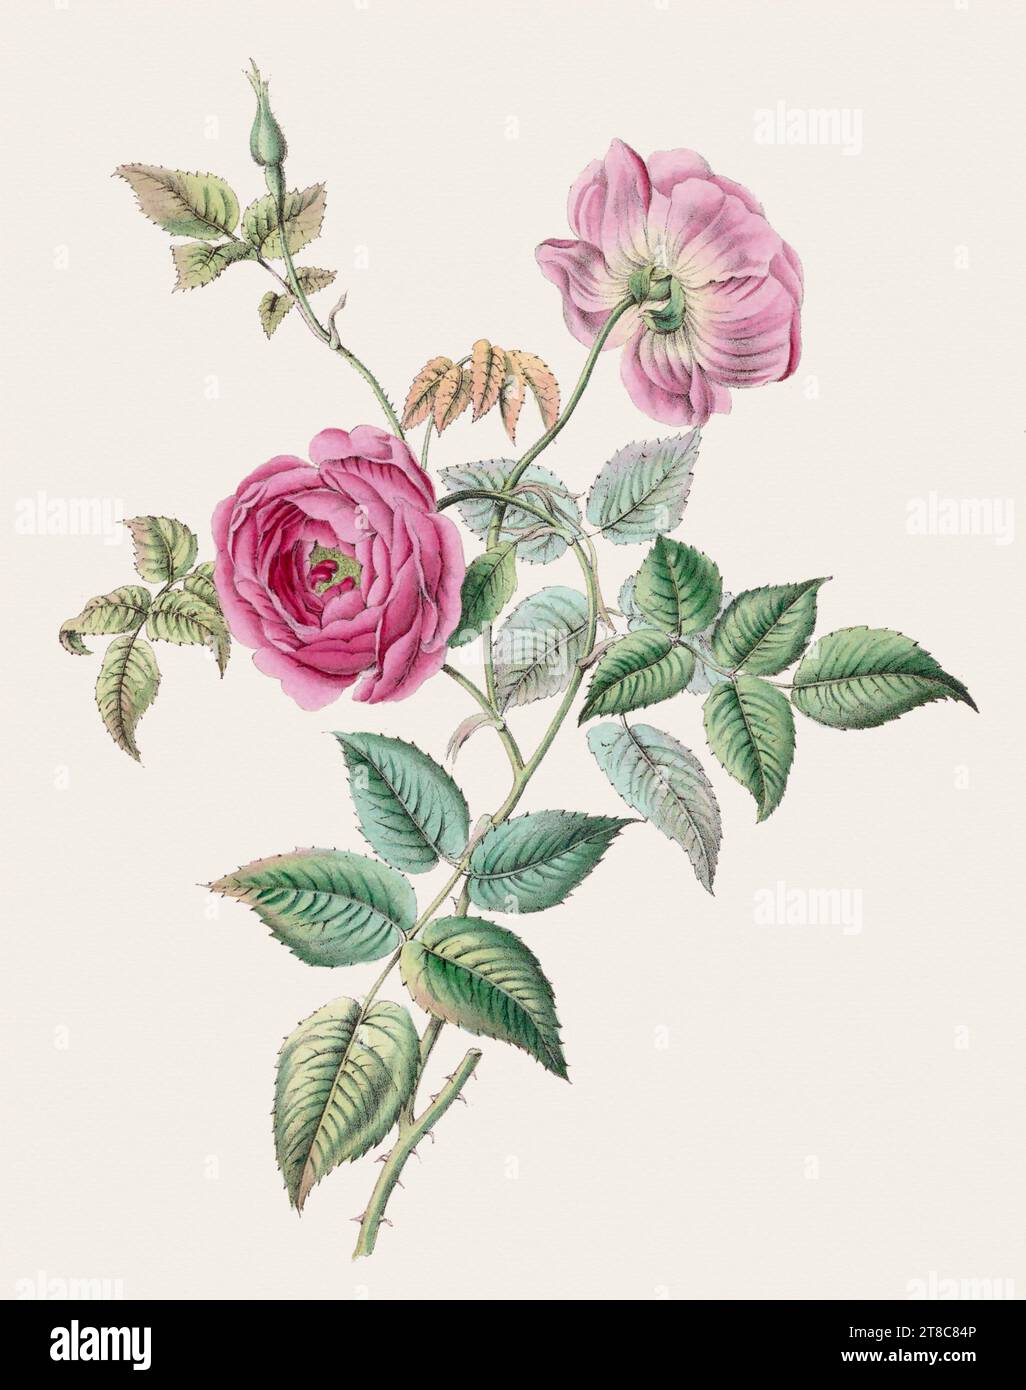 Vintage flower illustration. 19th-century book illustration: Exquisite watercolor depiction of delicate blooming flowers. Circa 1845 Stock Photo